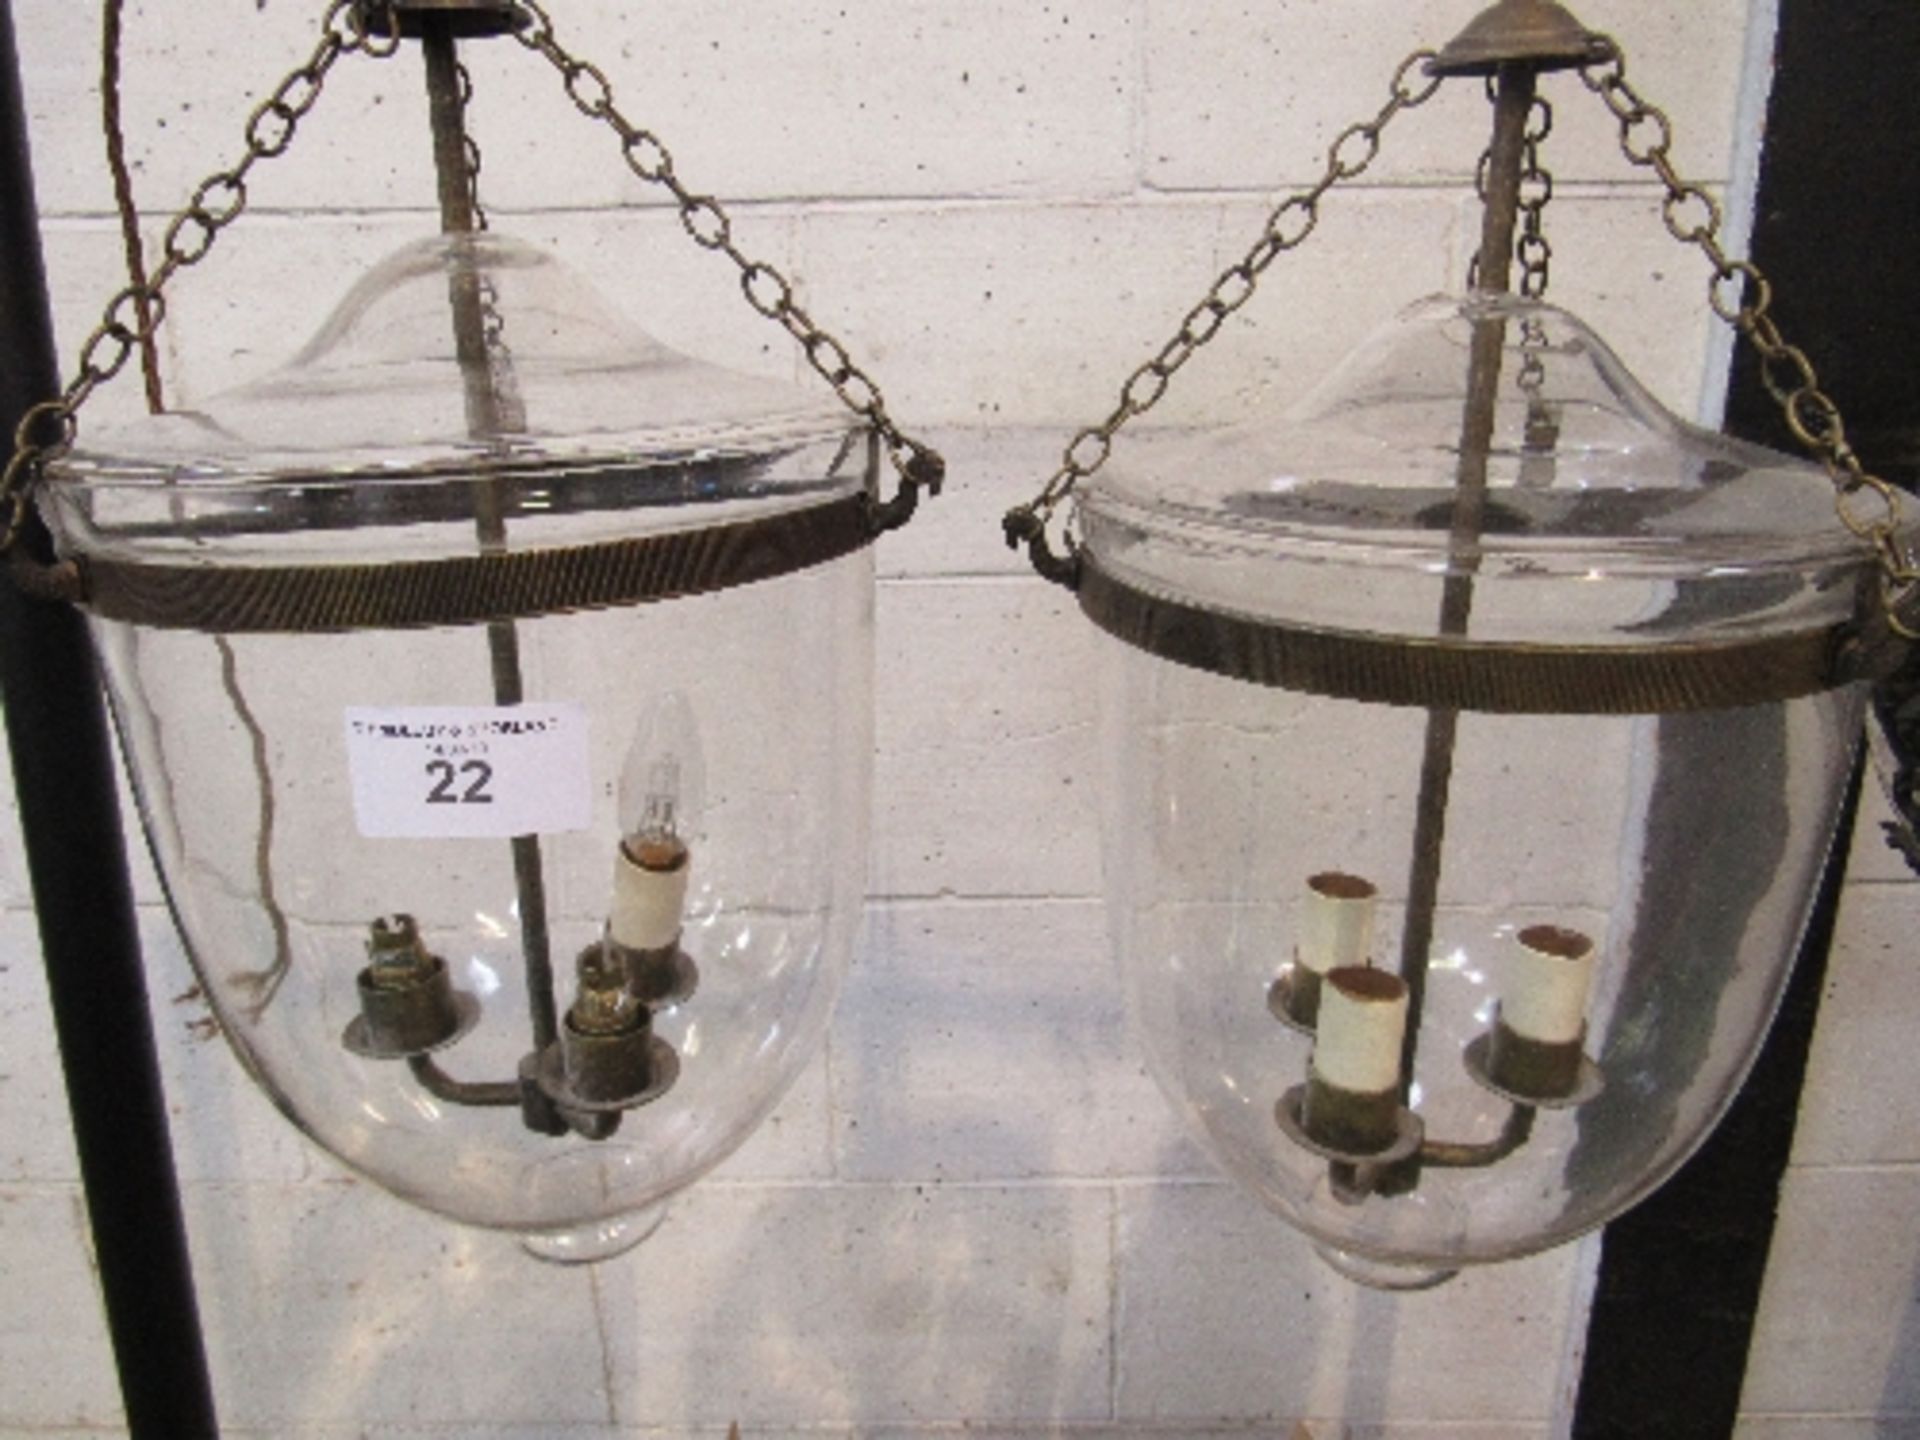 Pair of glass & brass Temple lanterns from Hector Finch. Estimate £20-40